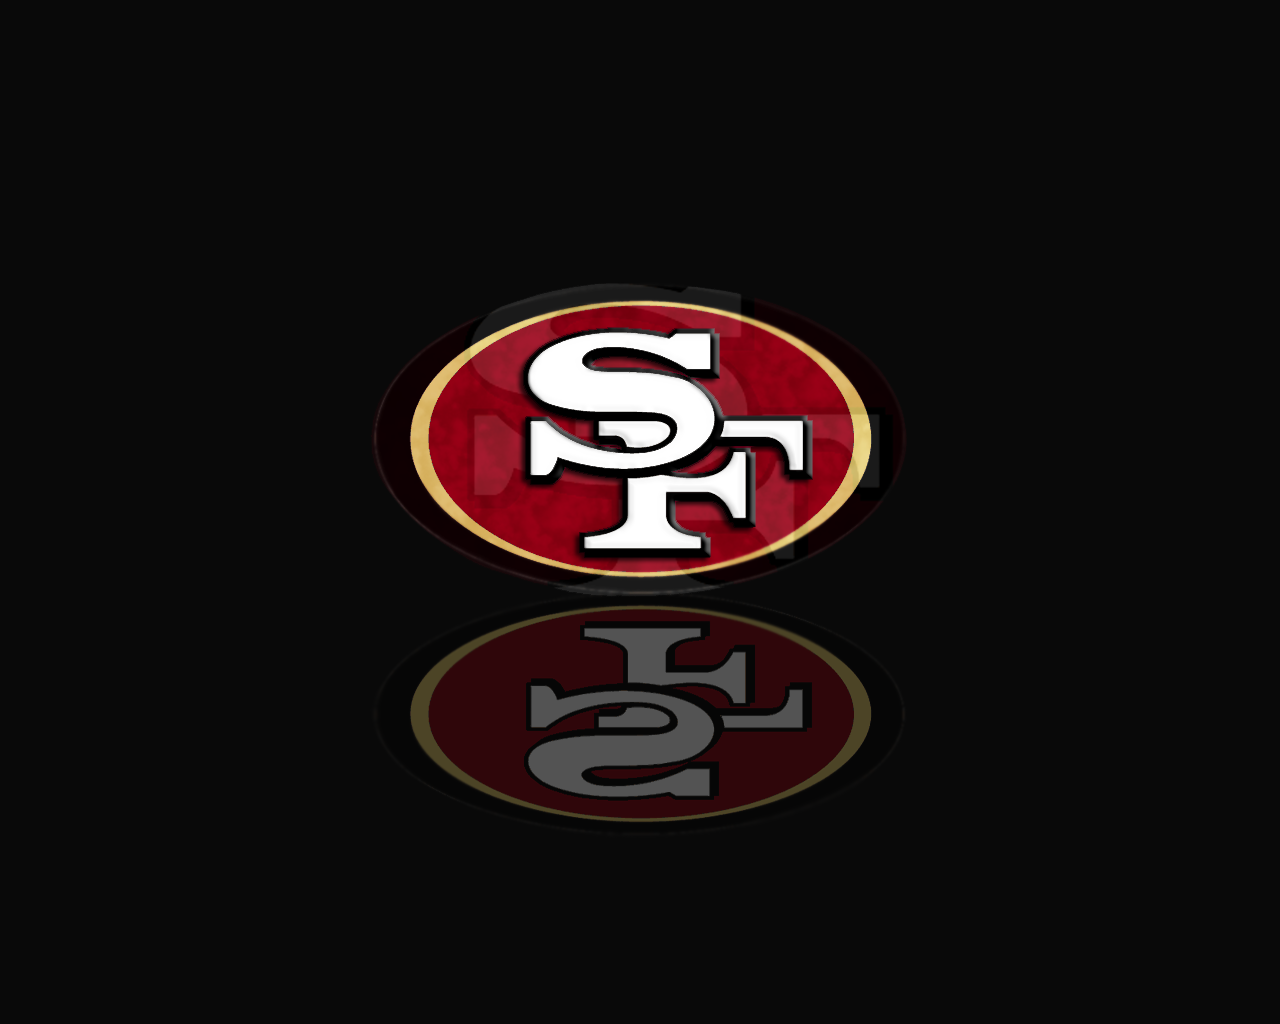 A really nice collections of logo an helmet wallpapers for the 49ers and the 